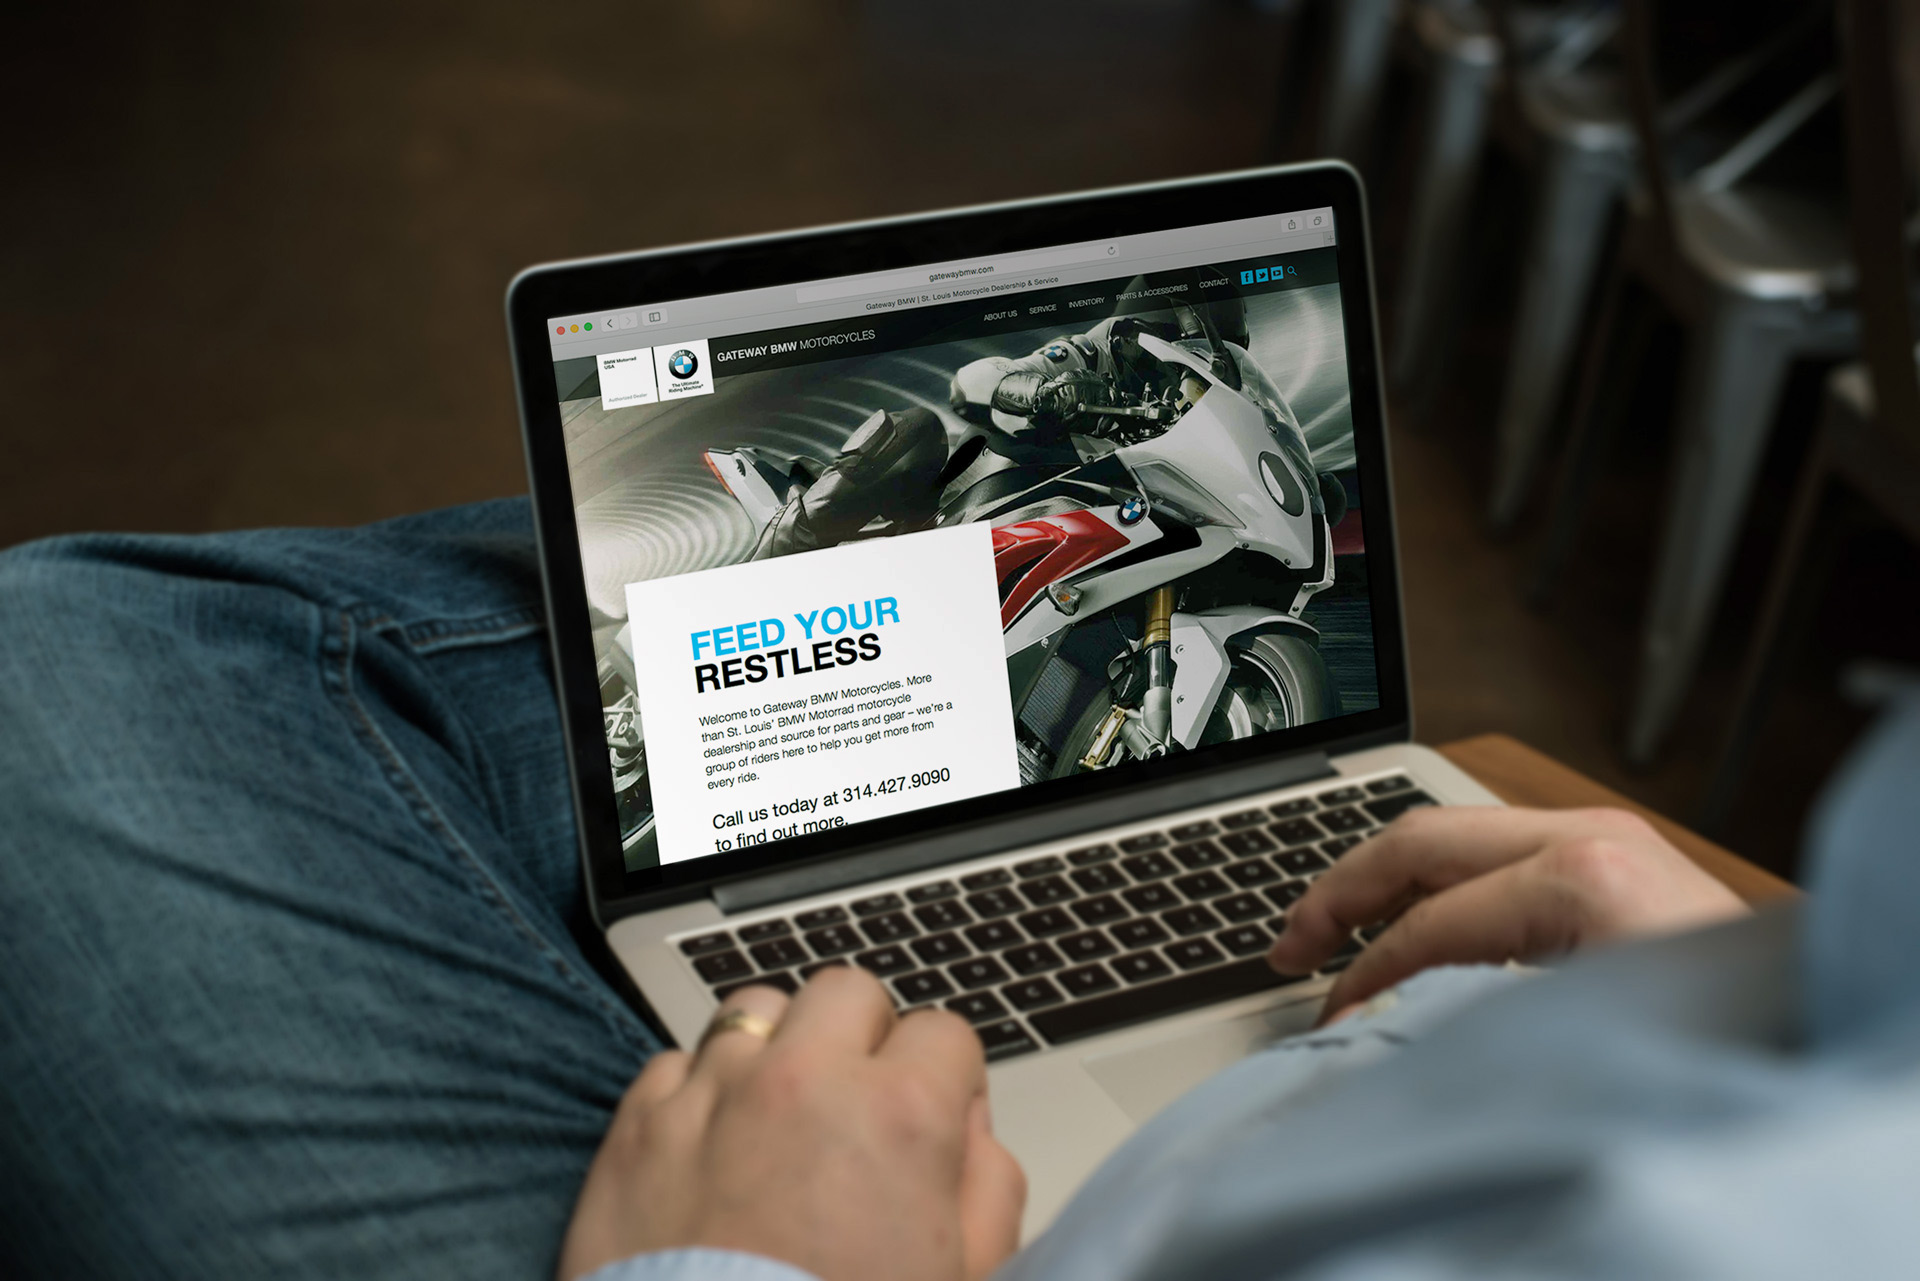 The new gateway BMW Website on a laptop